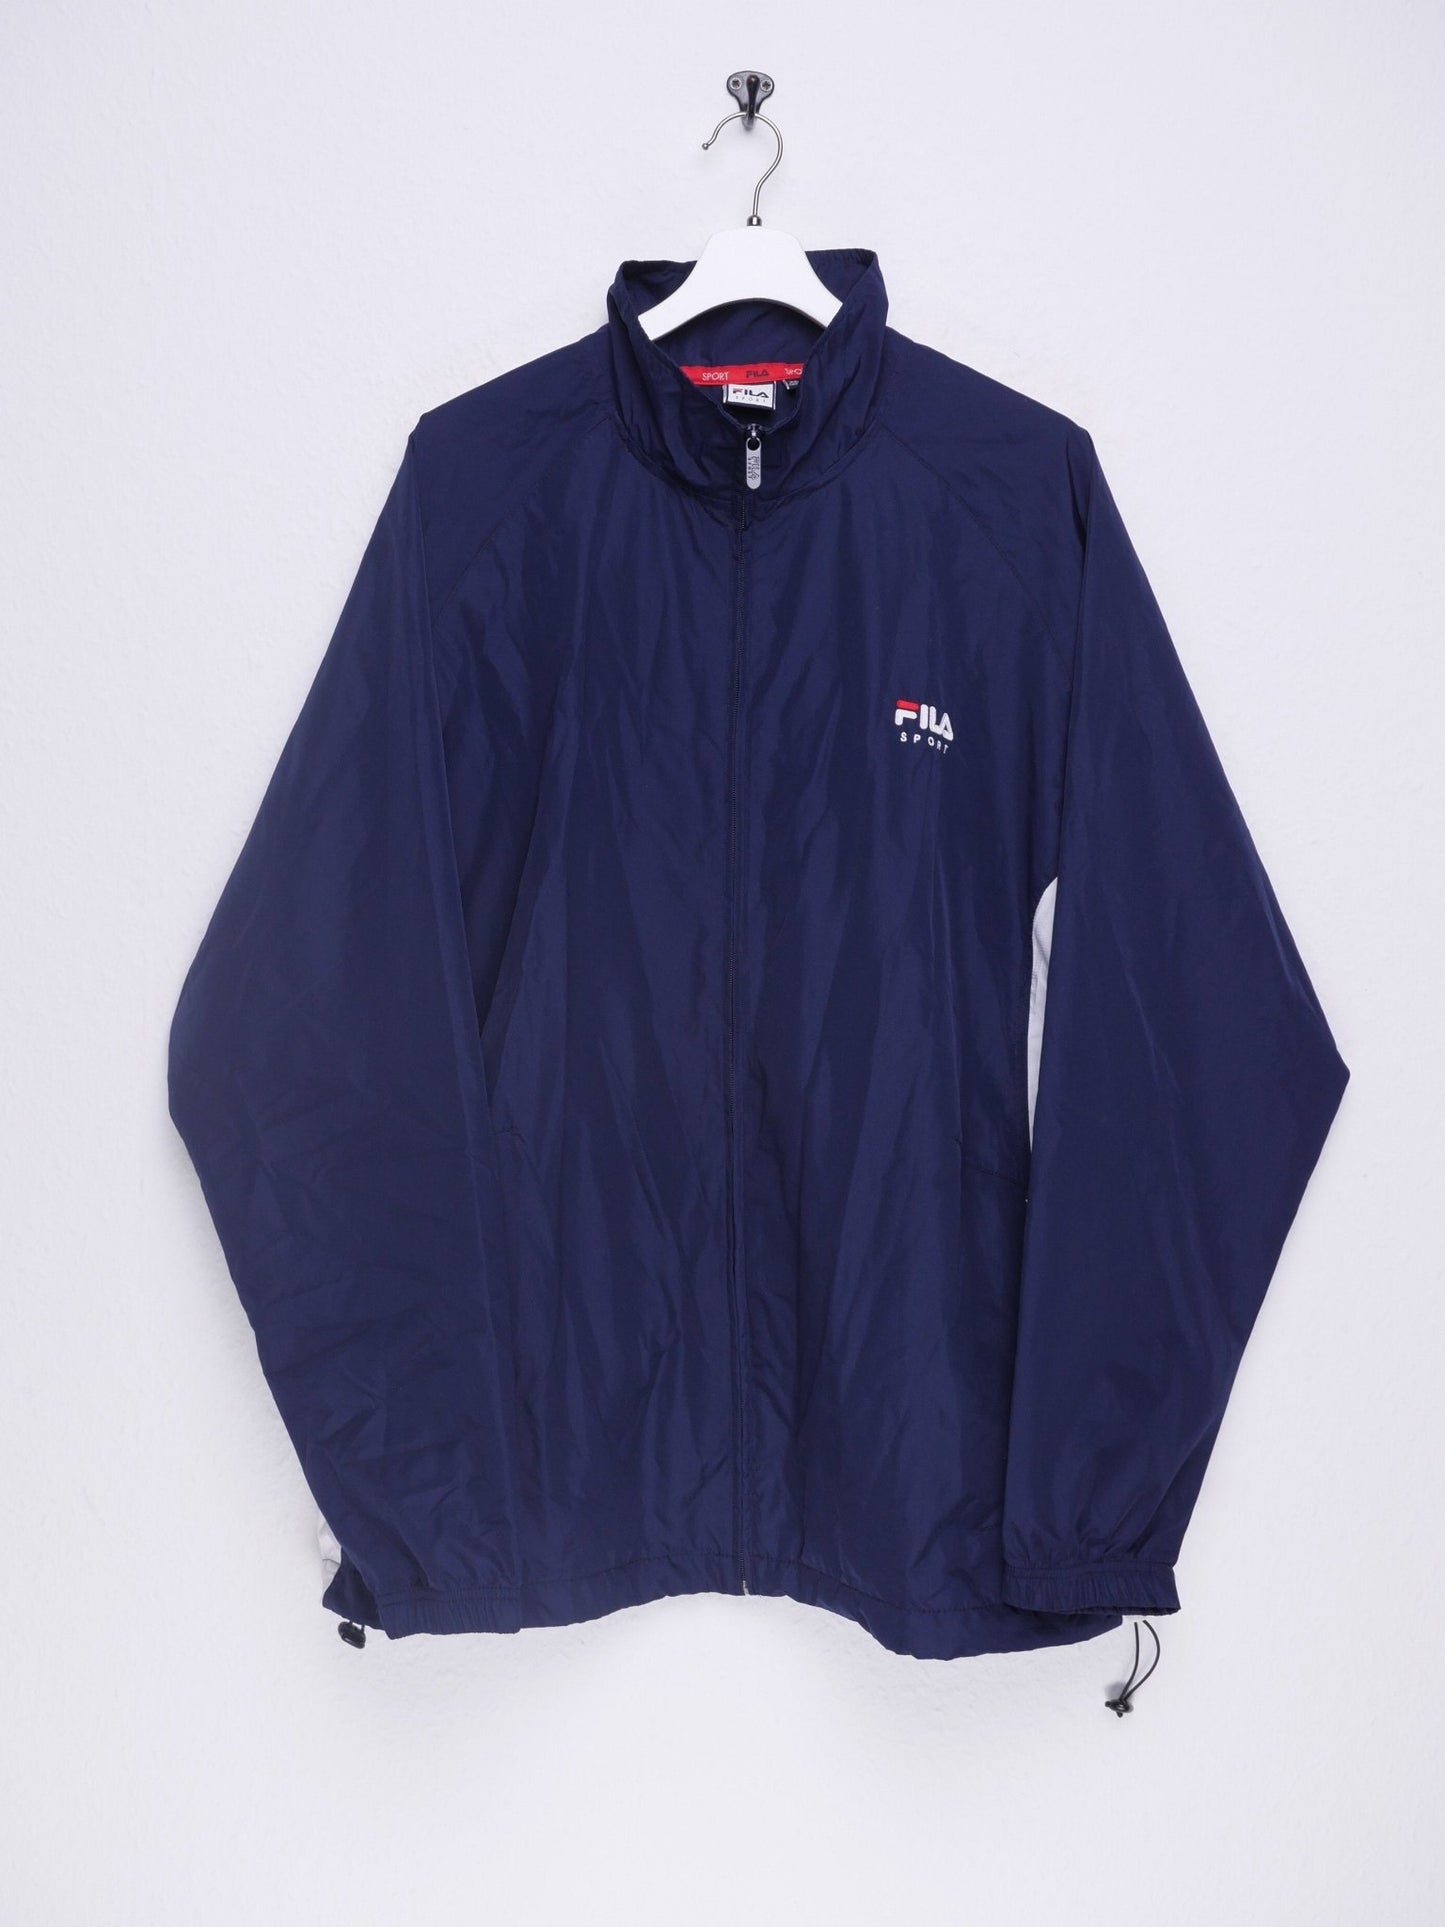 fila Sport embroidered Spellout two toned Track Jacket - Peeces